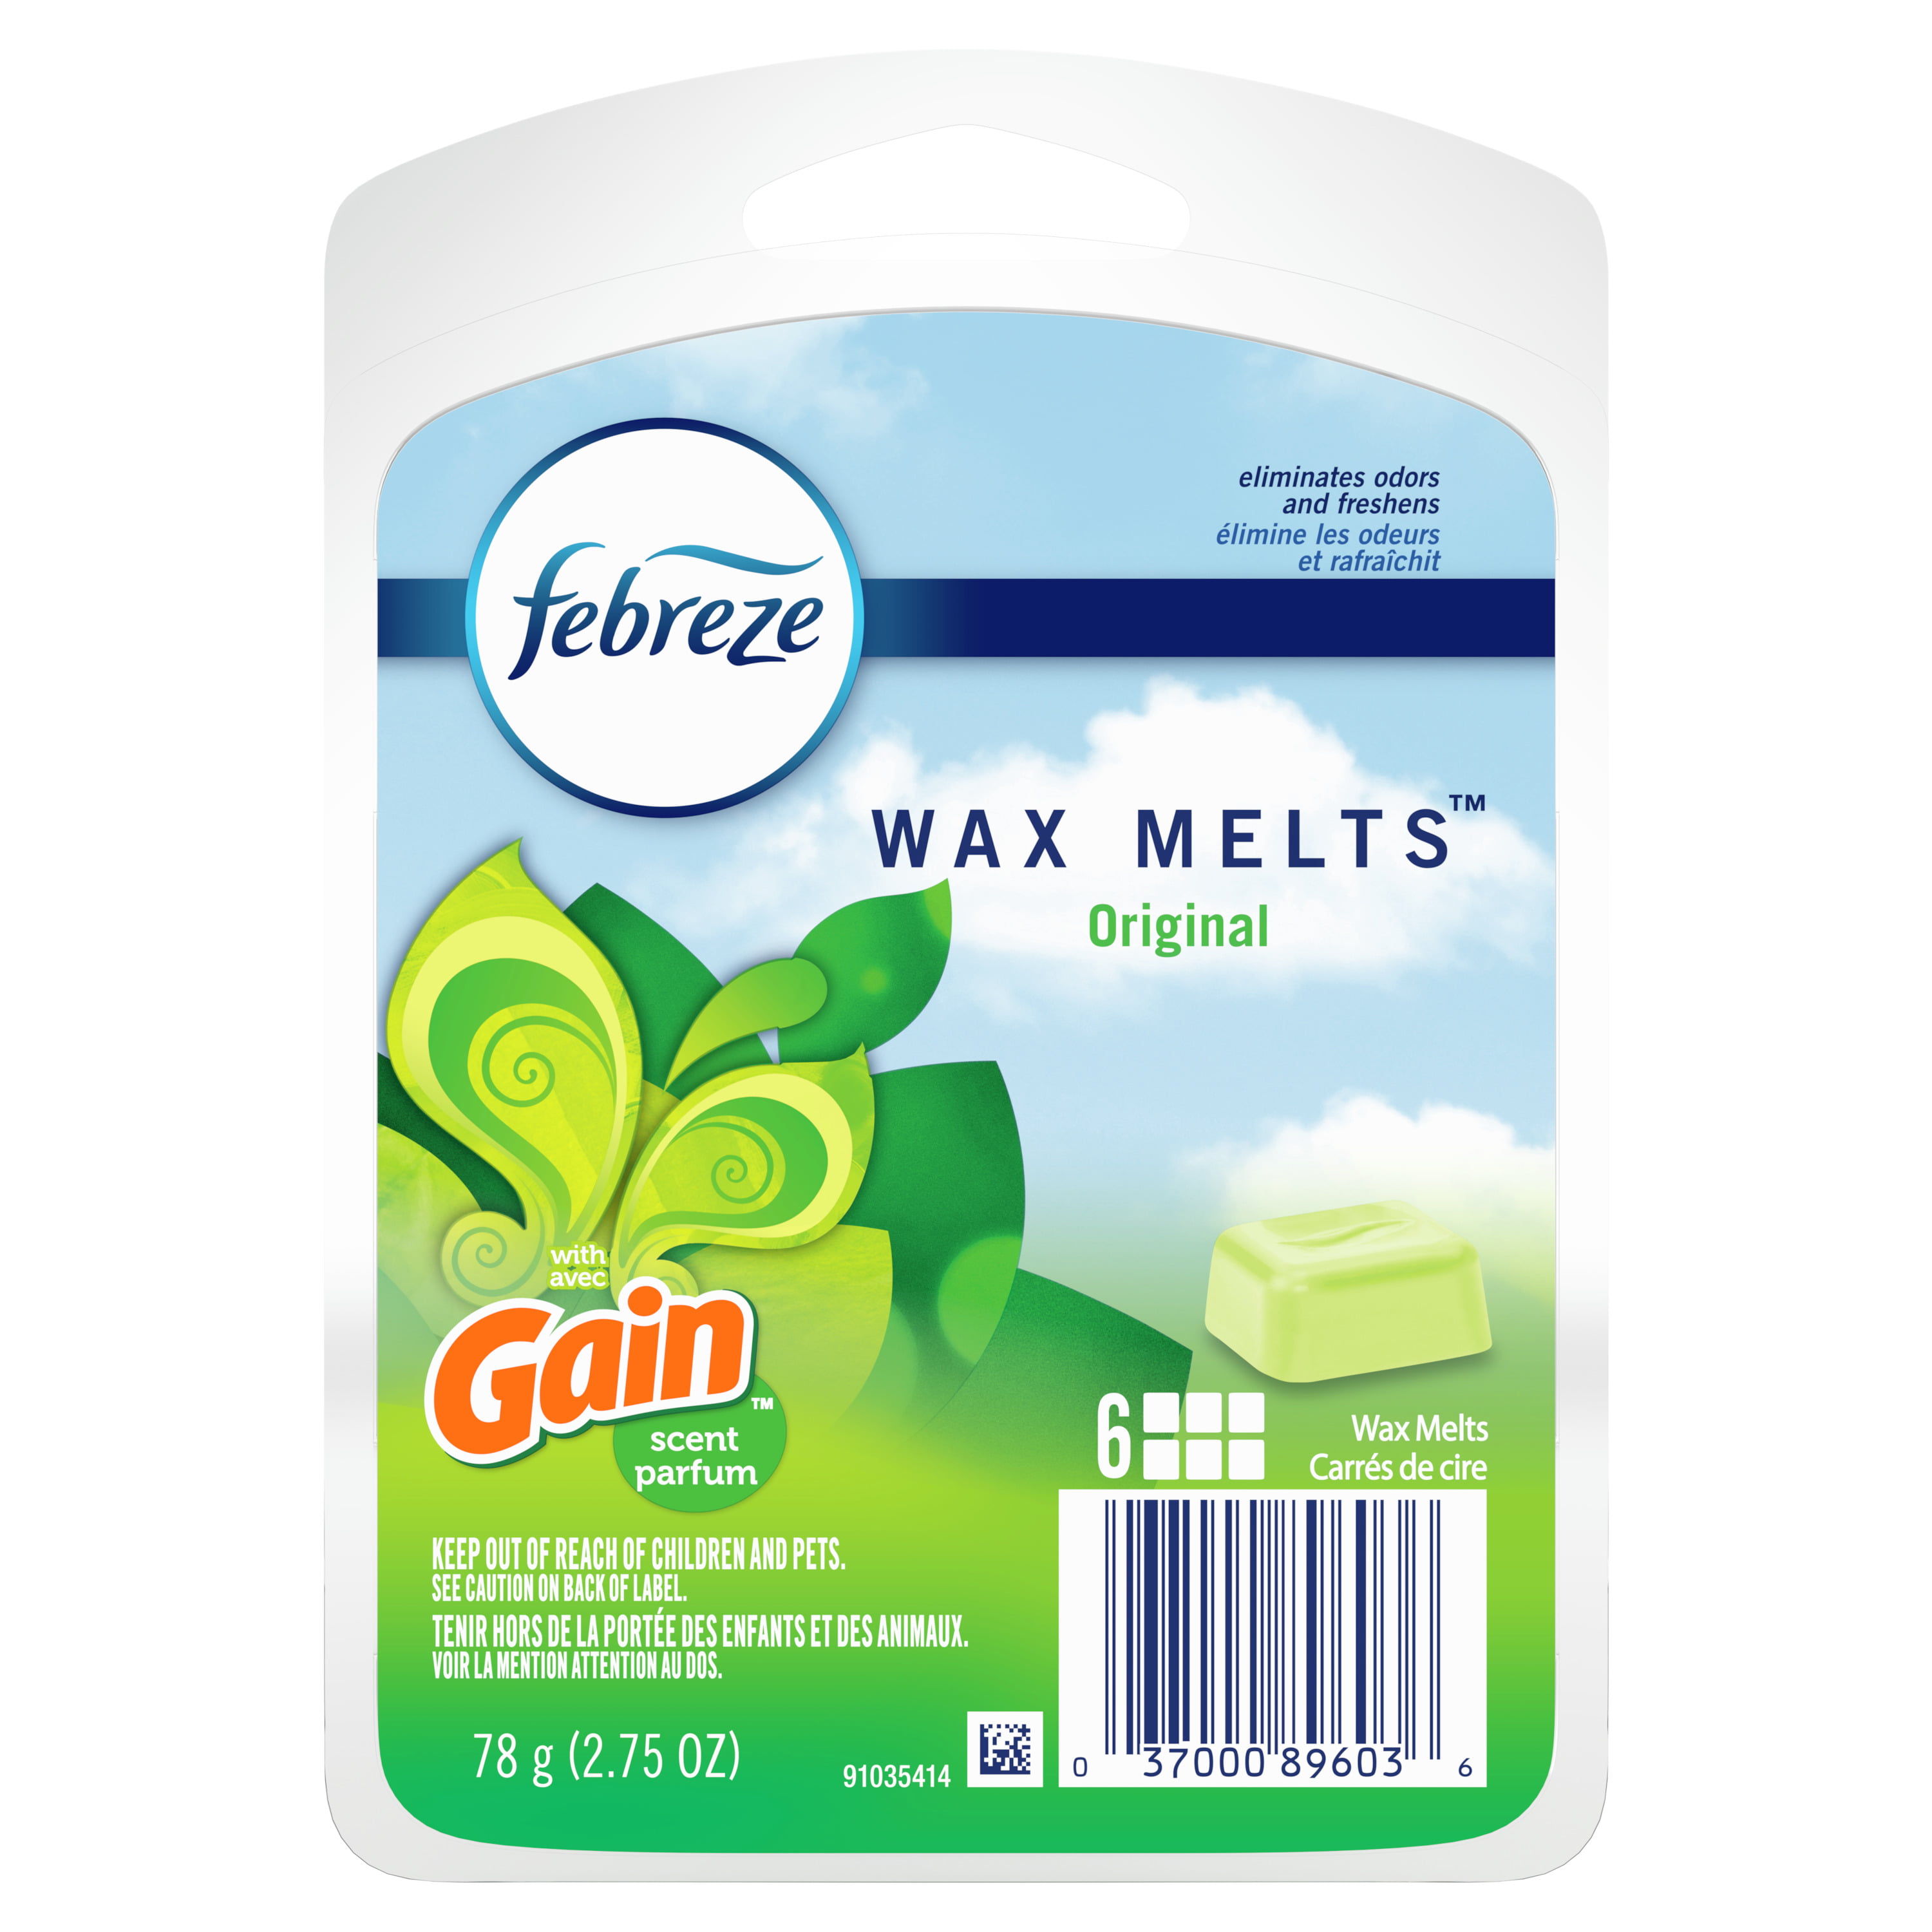 Glade Wax Melts Various Scents ~ 3 pkgs of 8 = 24 Melts Hrs of Fragrance/pk 